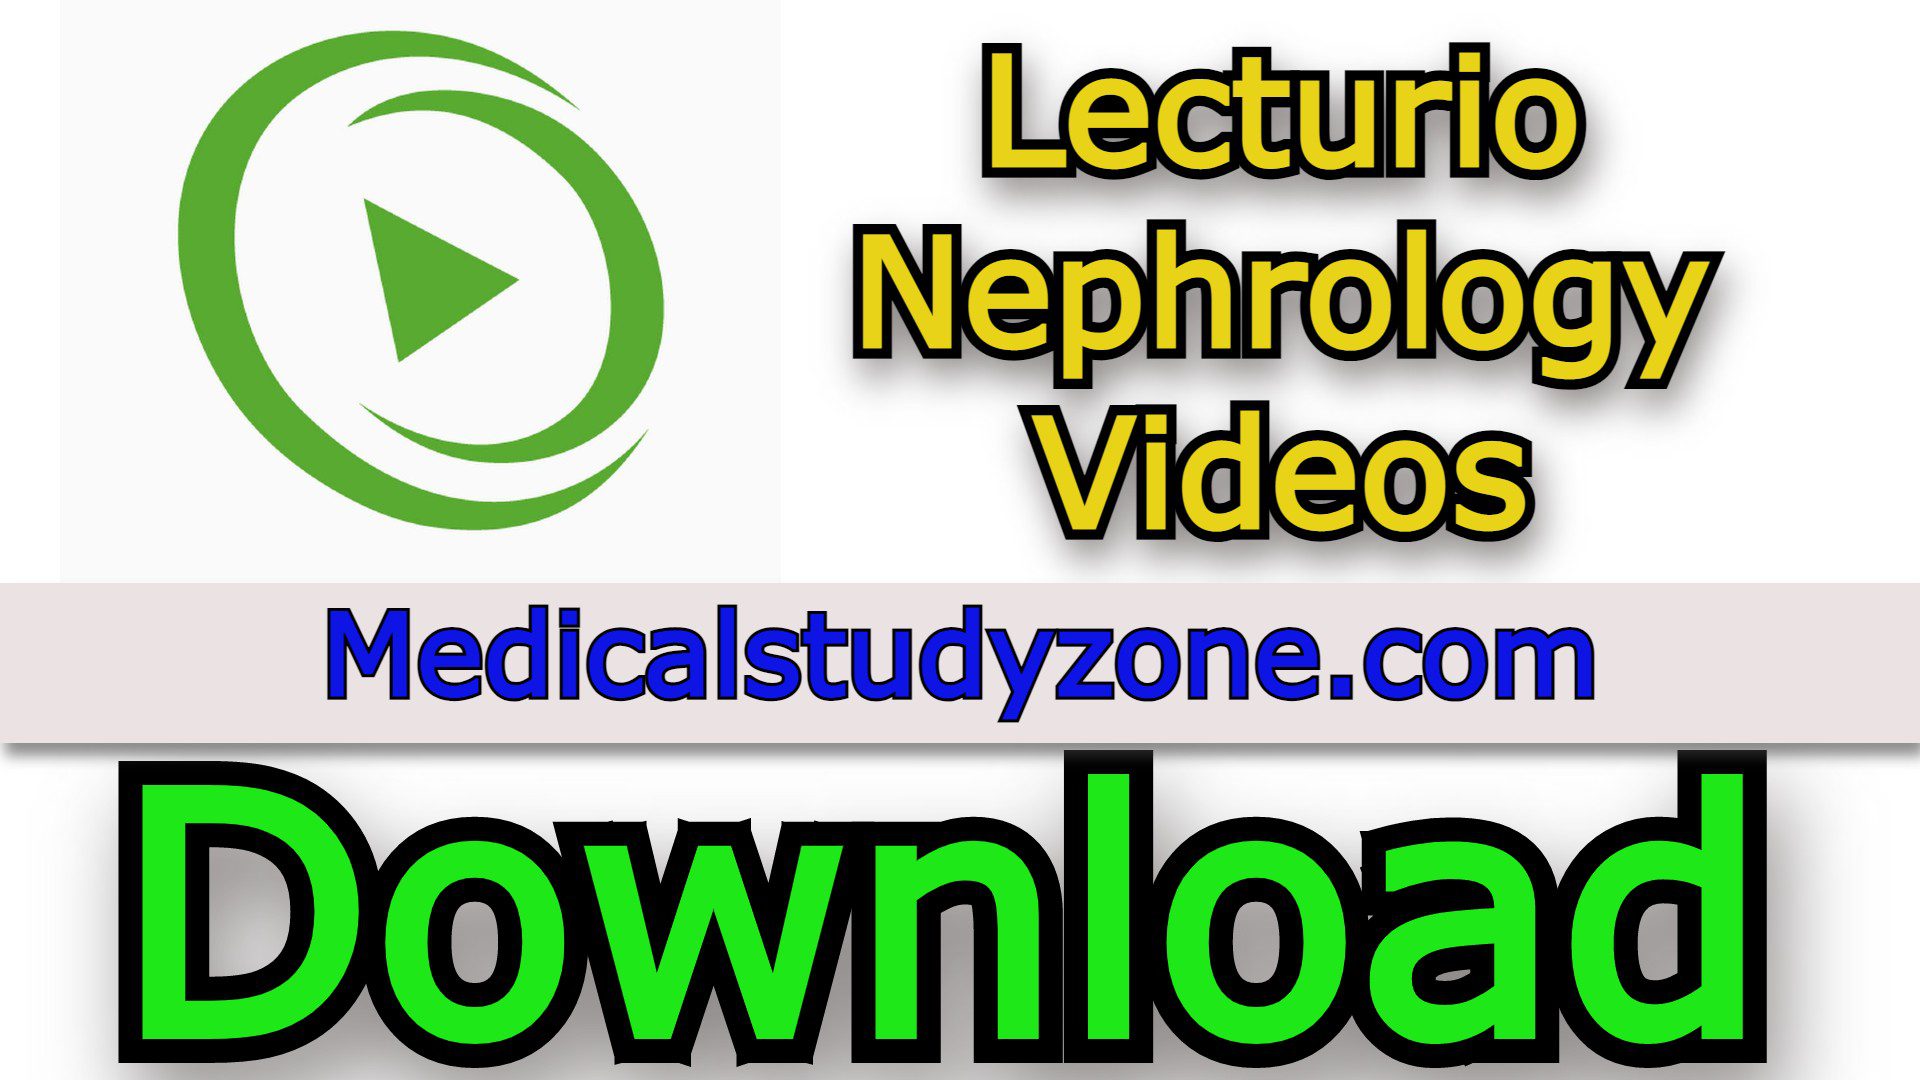 Lecturio Nephrology Videos 2022 Free Download